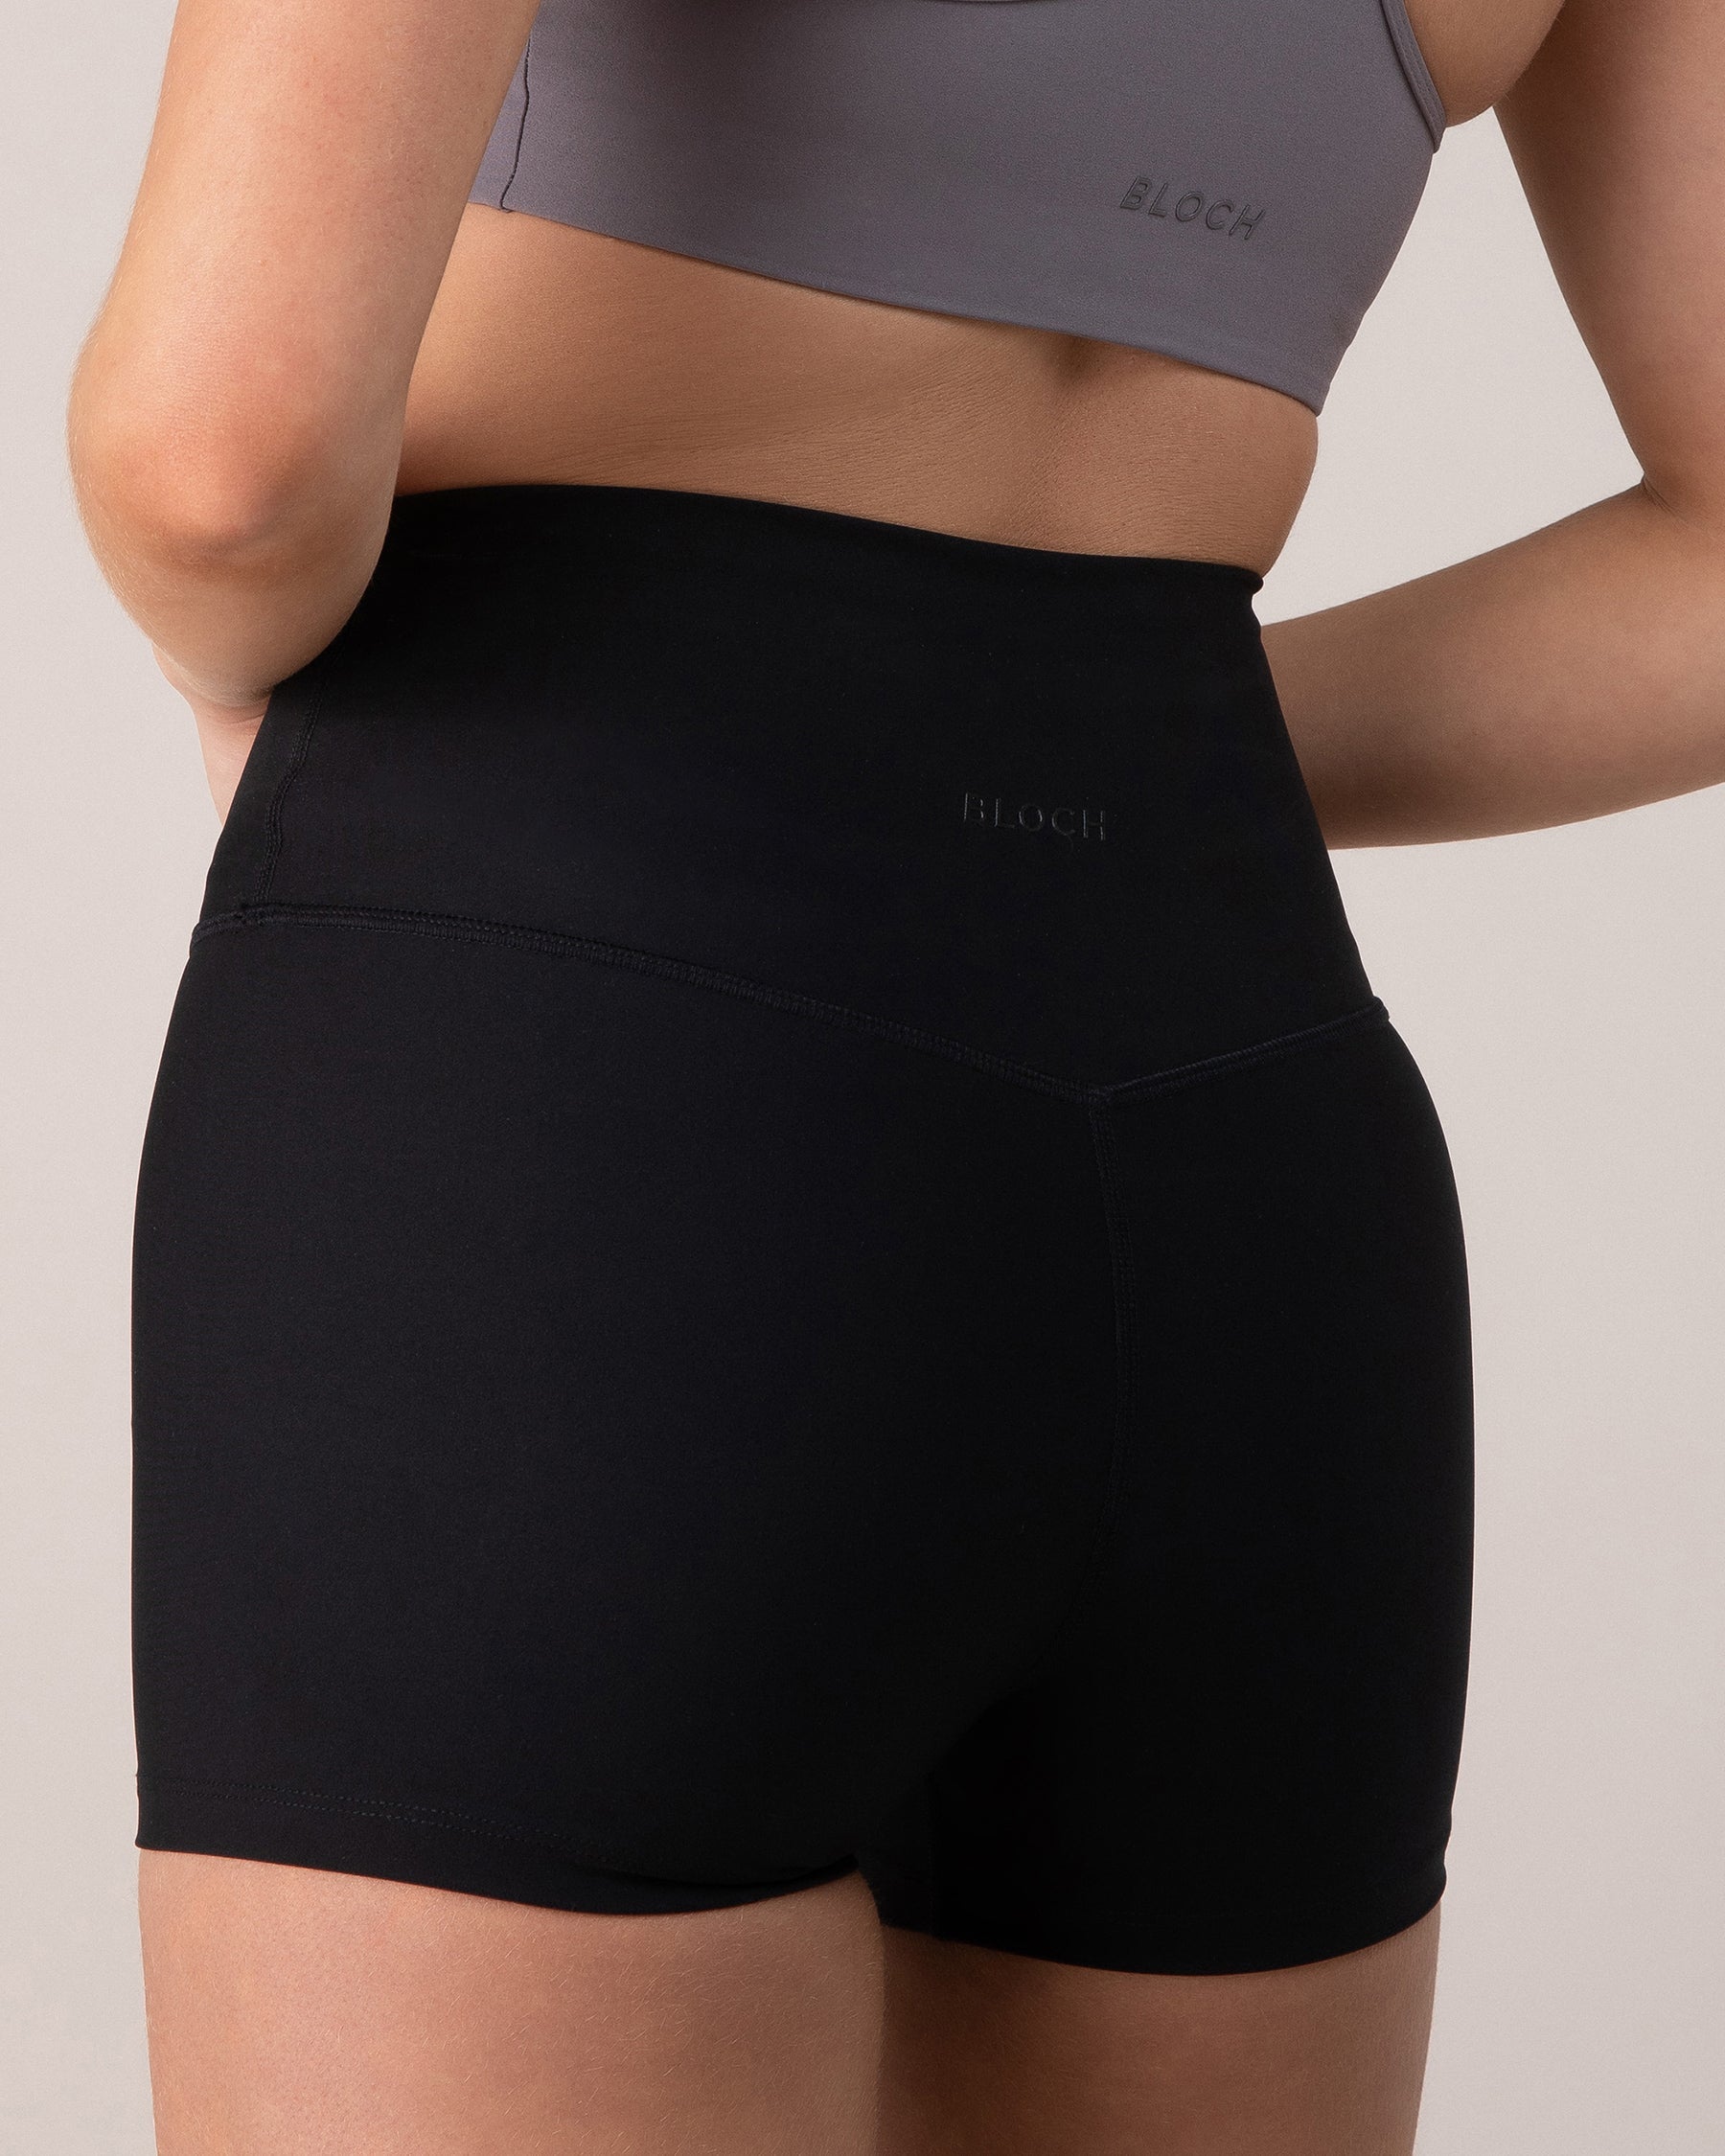 Totally Ready Sculpting Shapewear Shorts 3 Pack - Black/combo